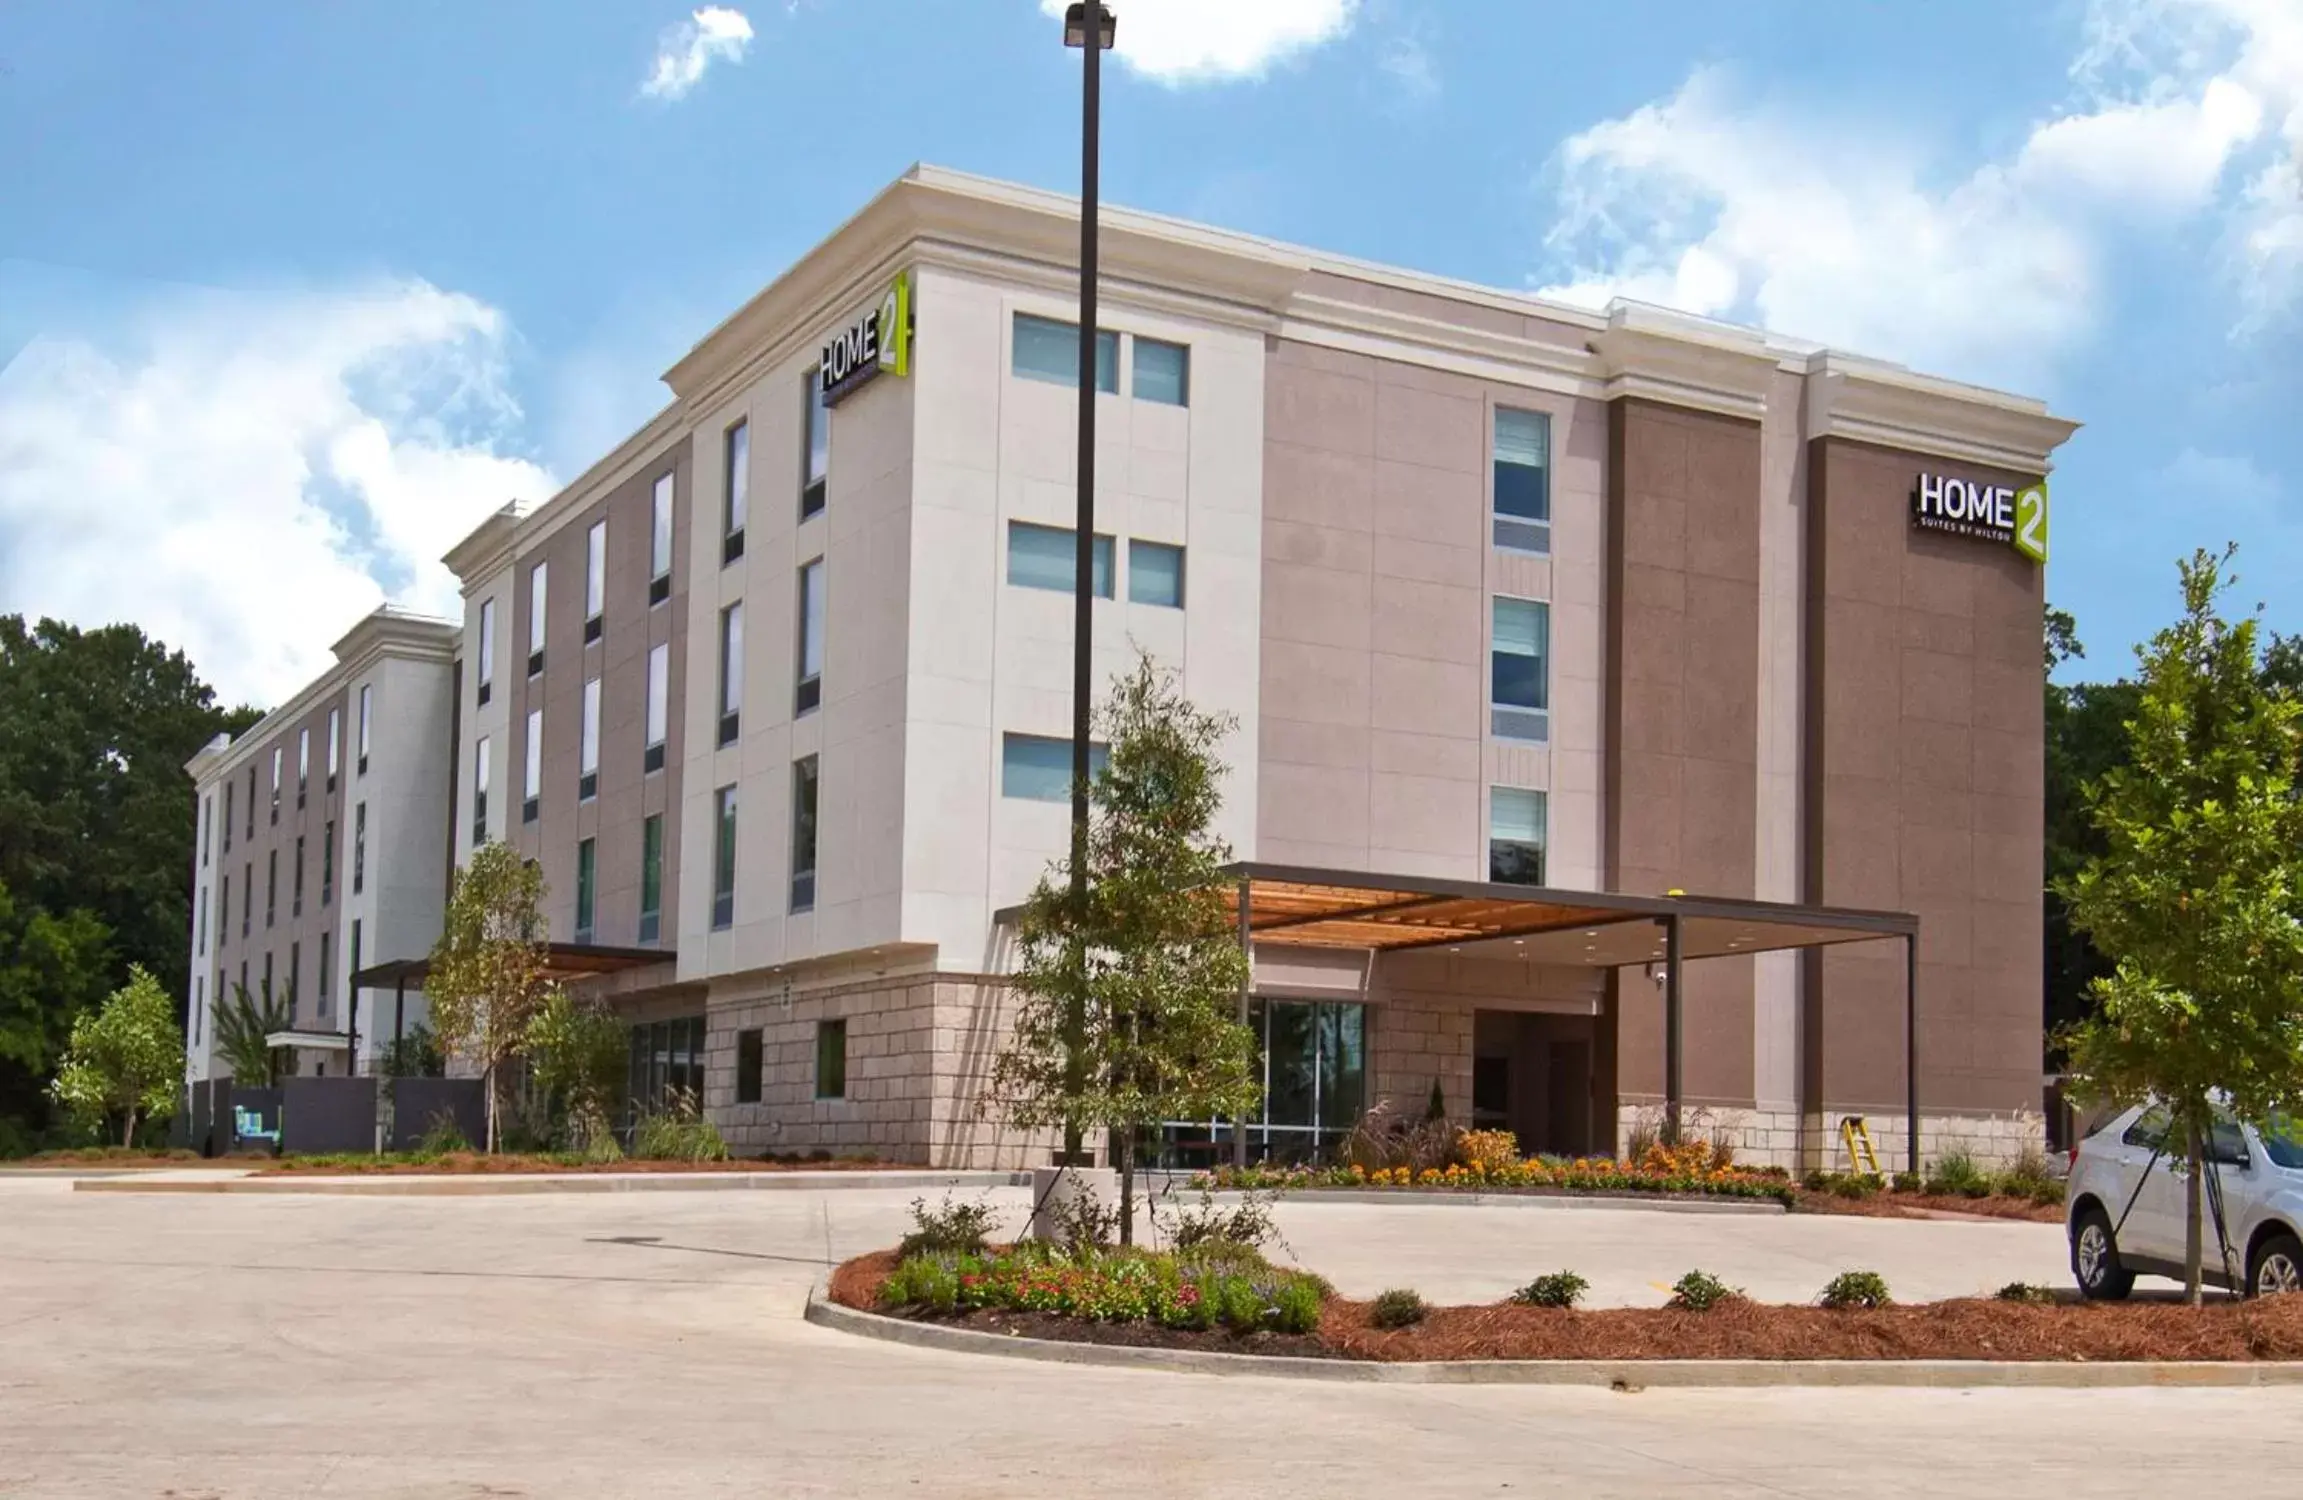 Property Building in Home2 Suites by Hilton Ridgeland